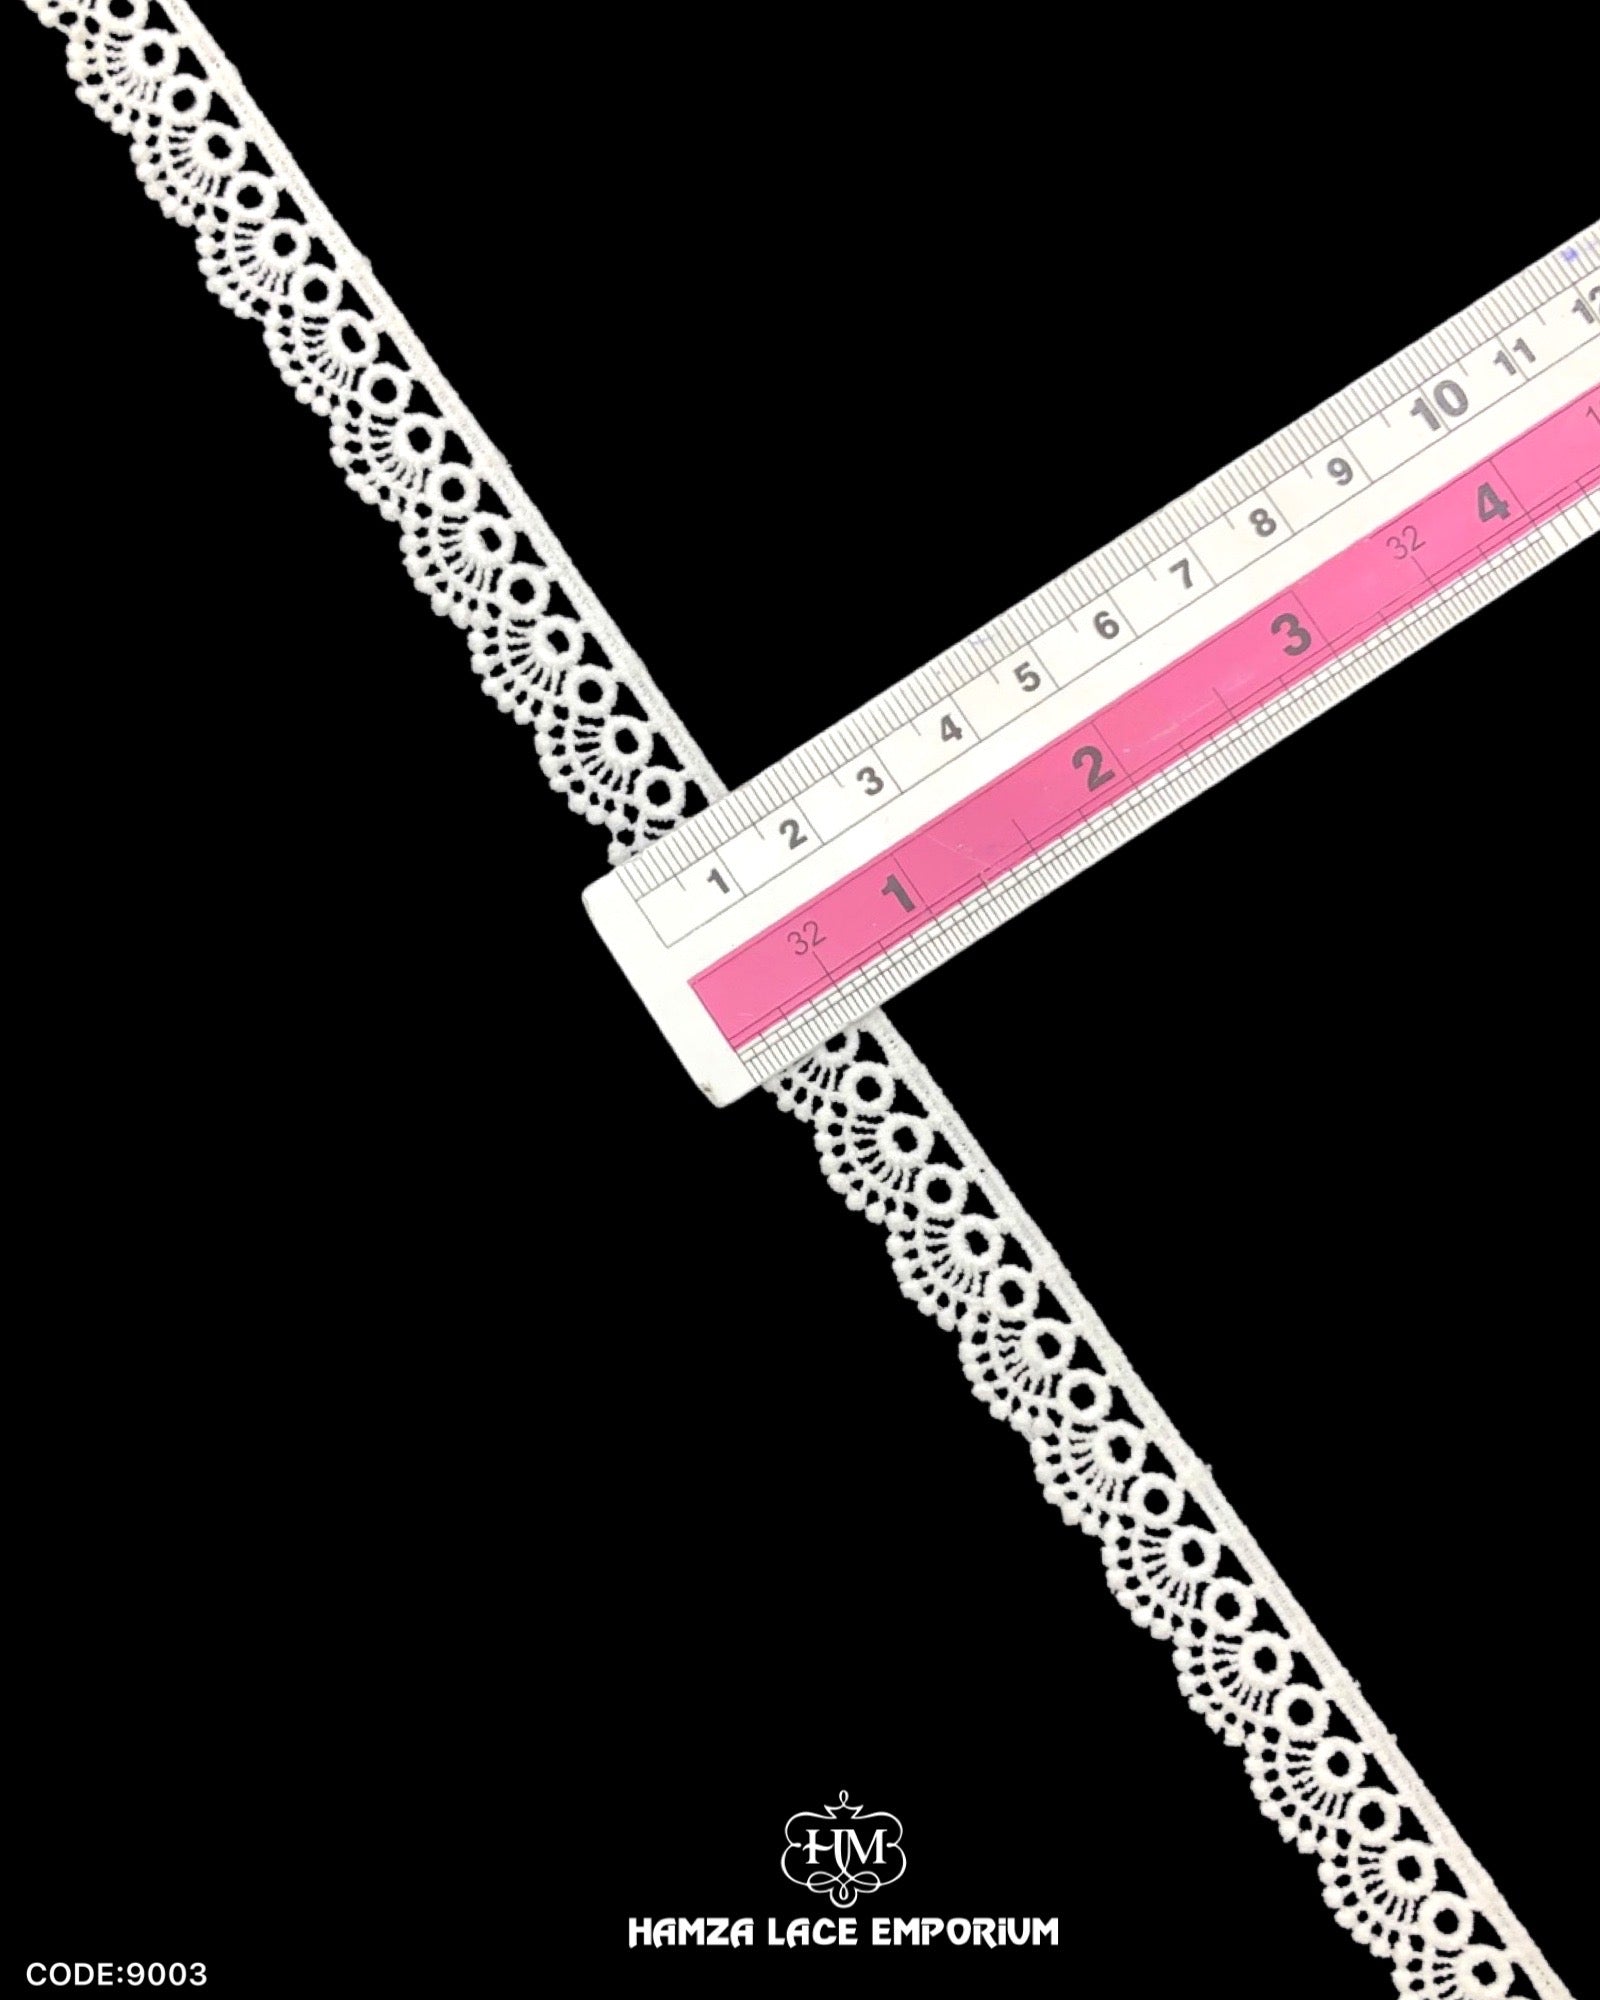 Size of the 'Edging Scallop Lace 9003' is shown with the help of a ruler as '0.5' inches